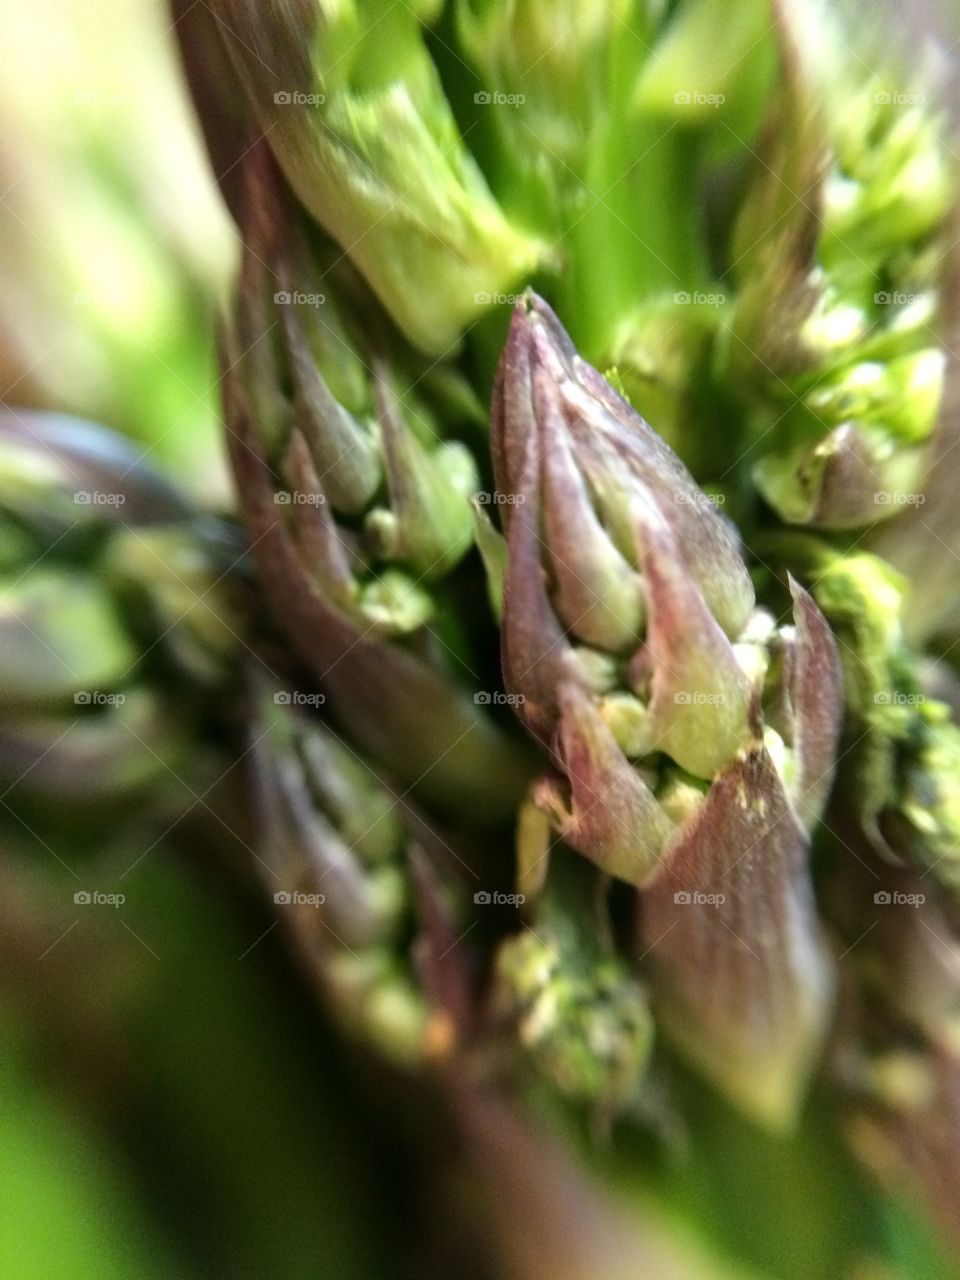 Asparagus. What's that funny smell when I pee!